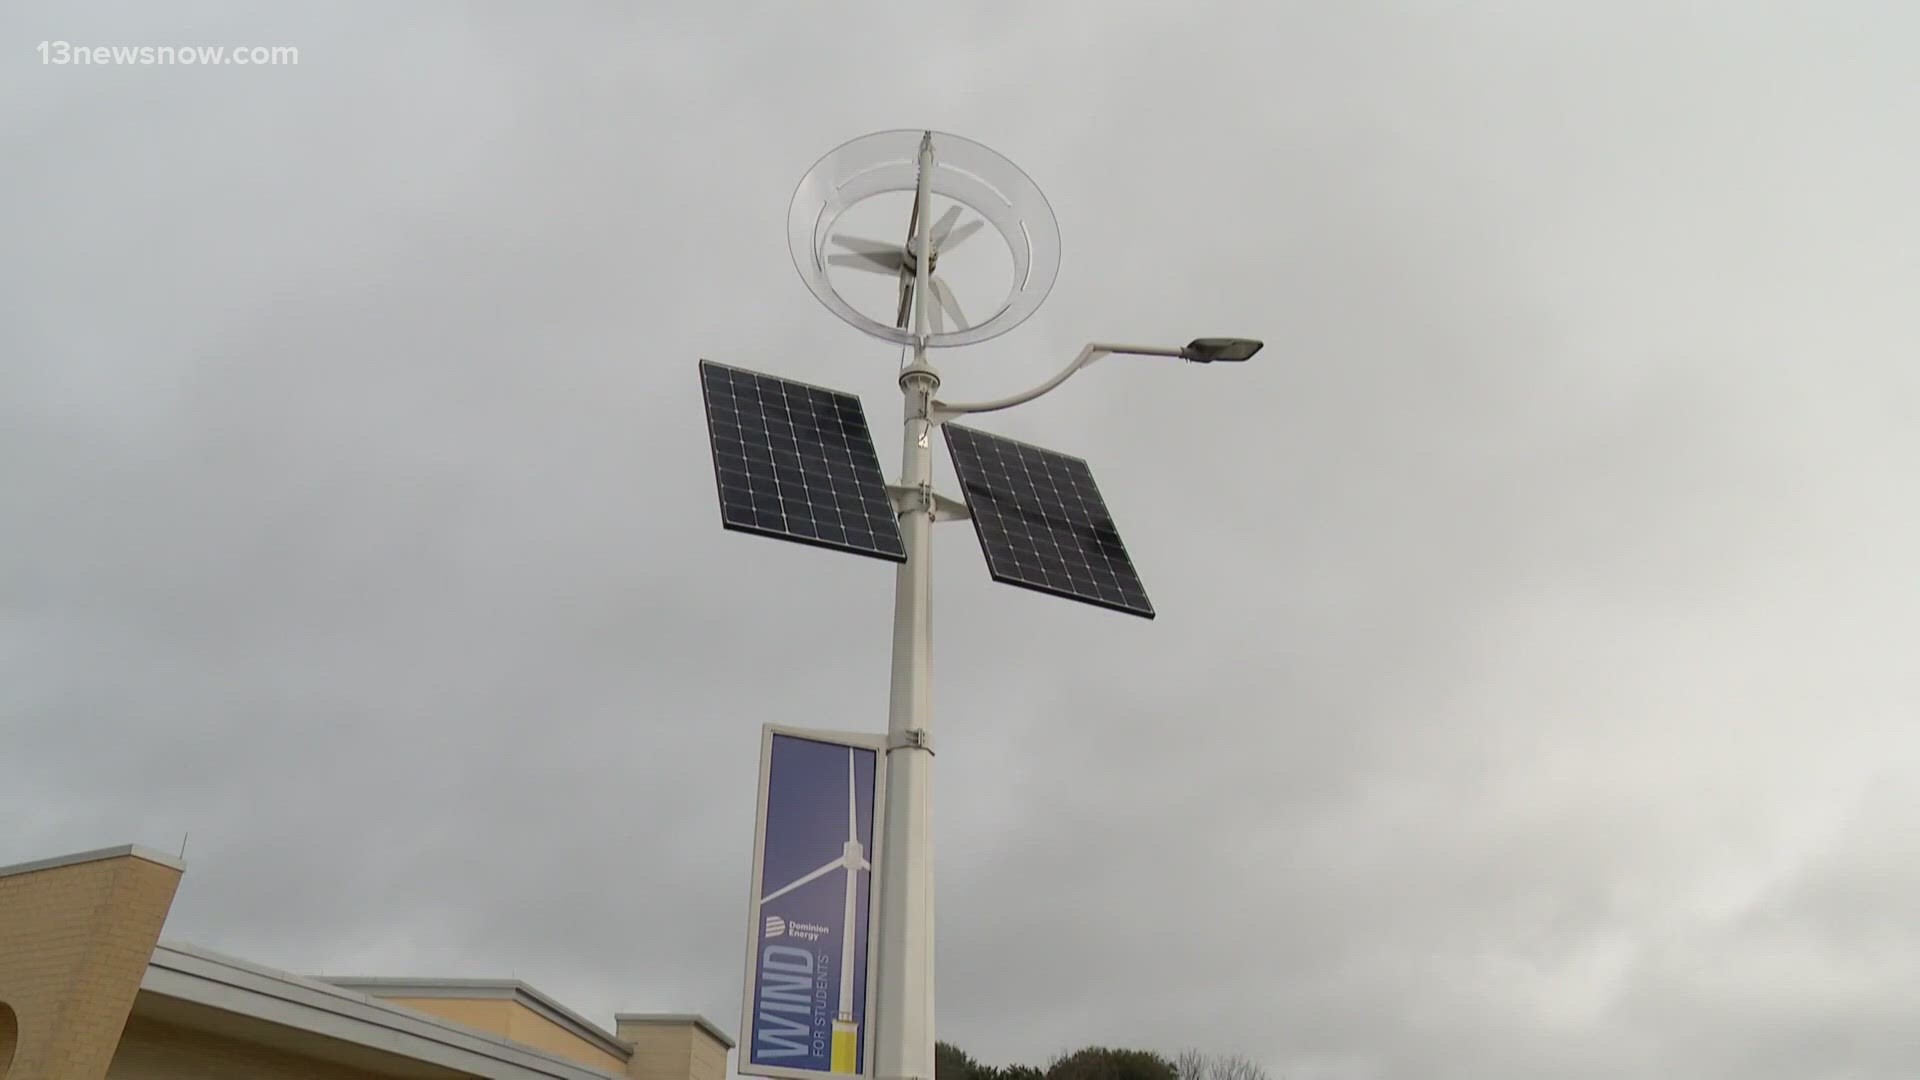 Susie 4 is a 30-foot-tall micro wind turbine that will sit outside Ocean View Elementary. It will help students collect real-time data from the wind and sunlight.